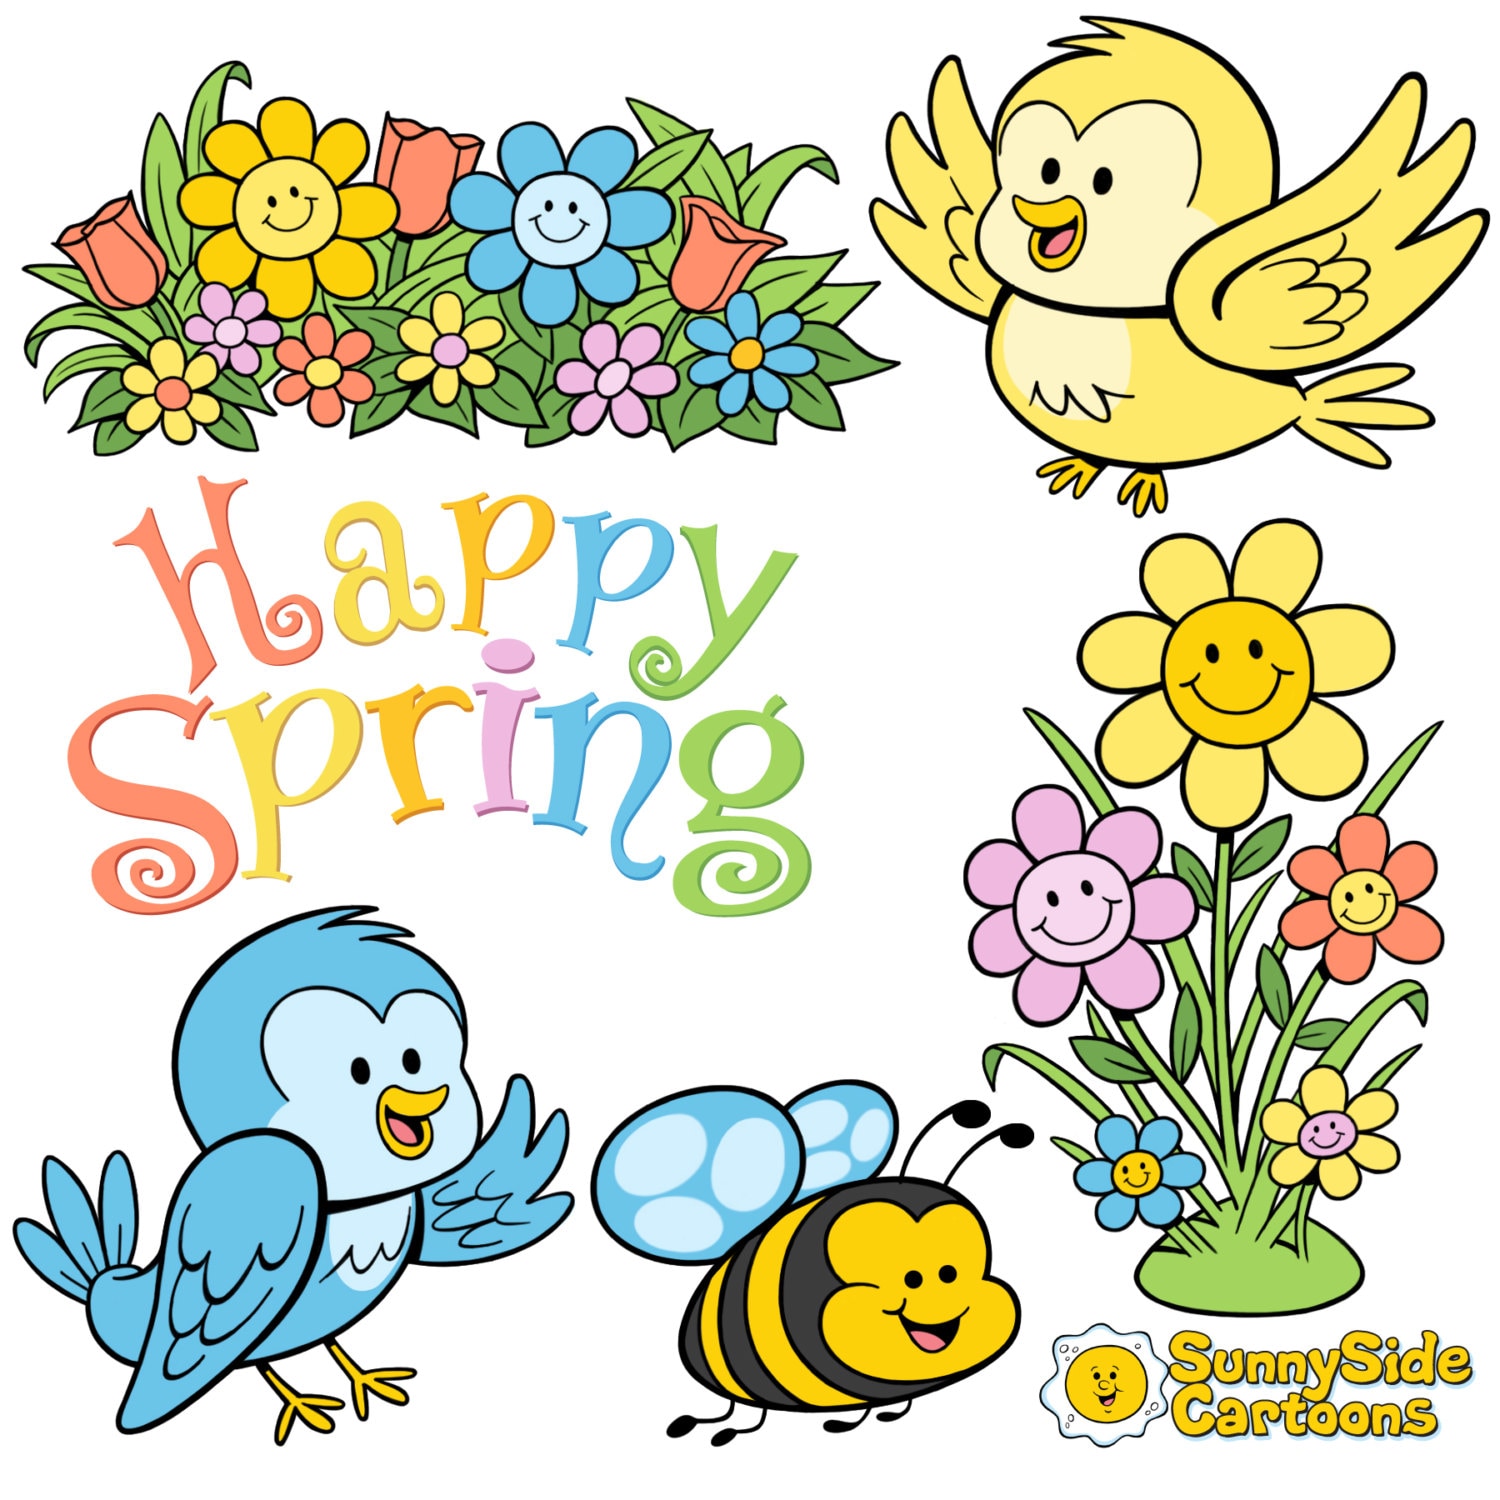 Springtime Cartoons Make your projects really bloom with